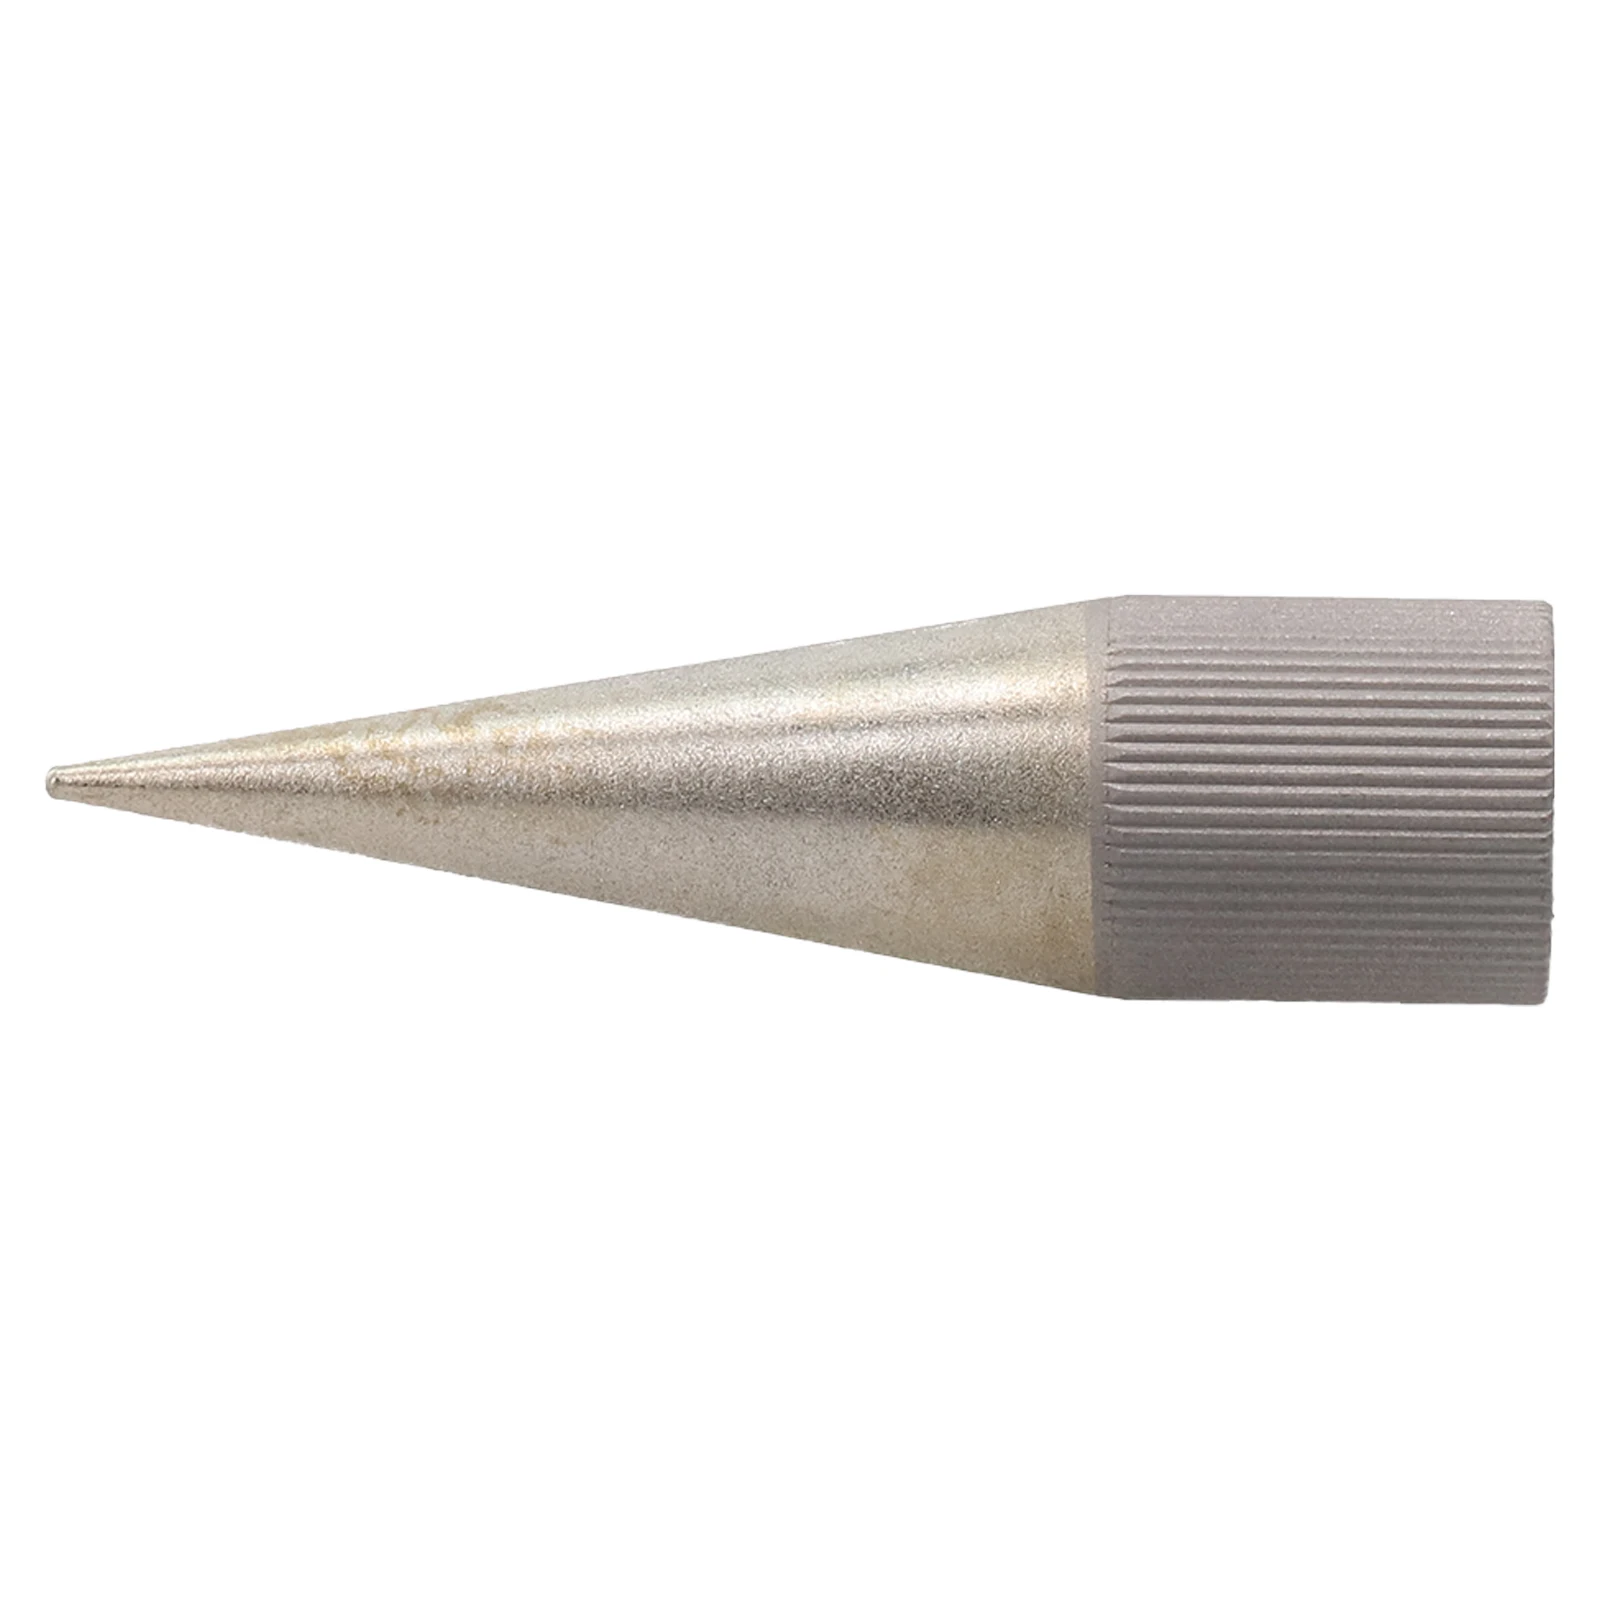 

Tool Accessories Punch Polishe Polisher Sharpener Round Hole Sharpening Tool Stainless Steel 75mm Length Emery Plated